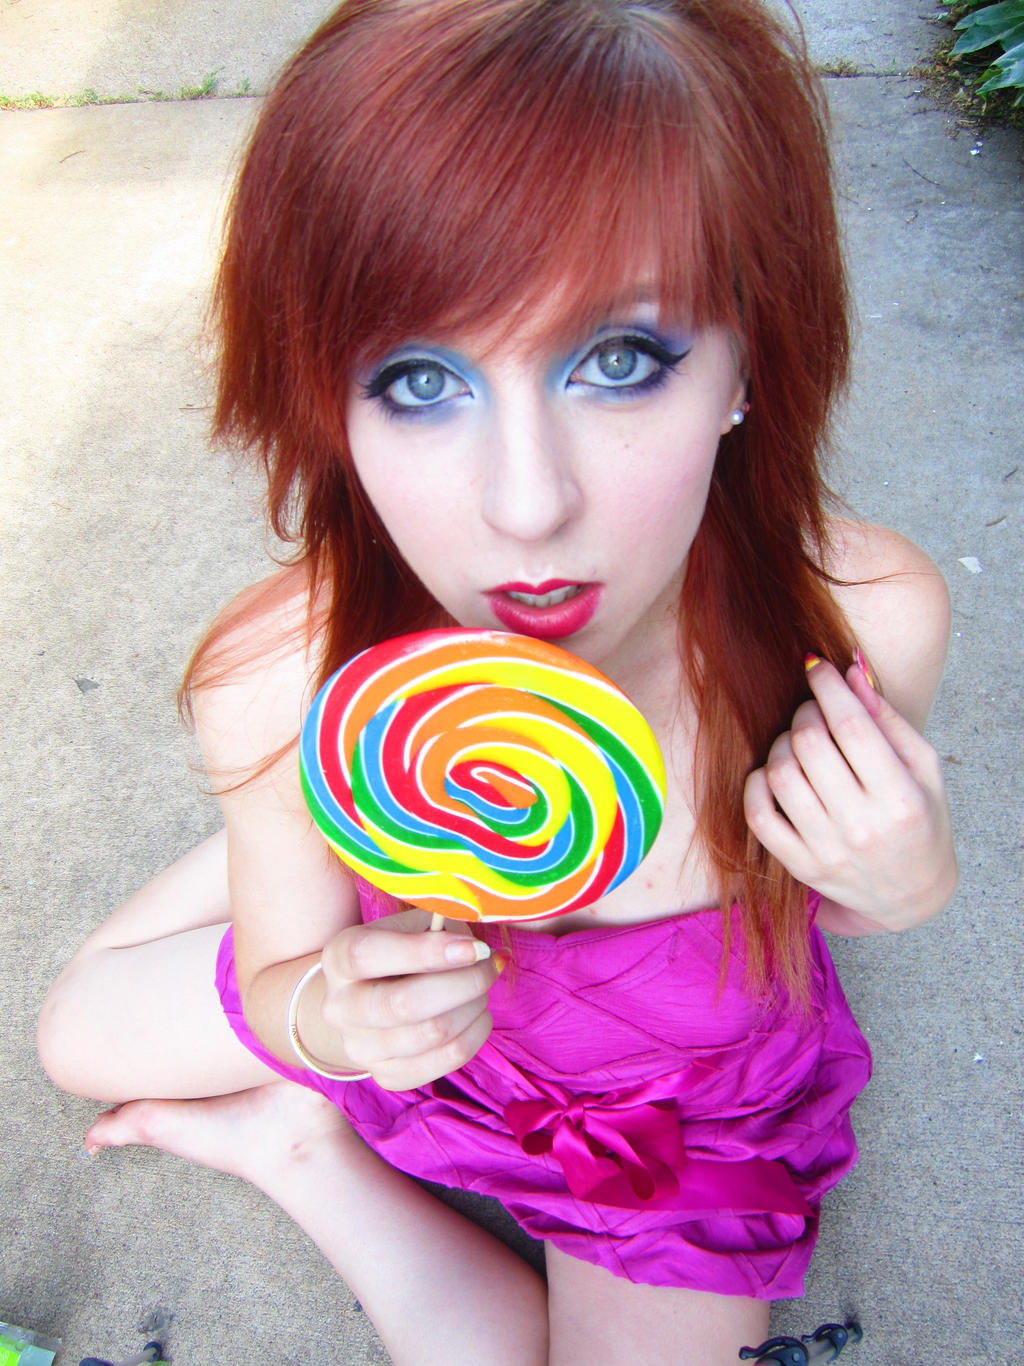 Candy 7